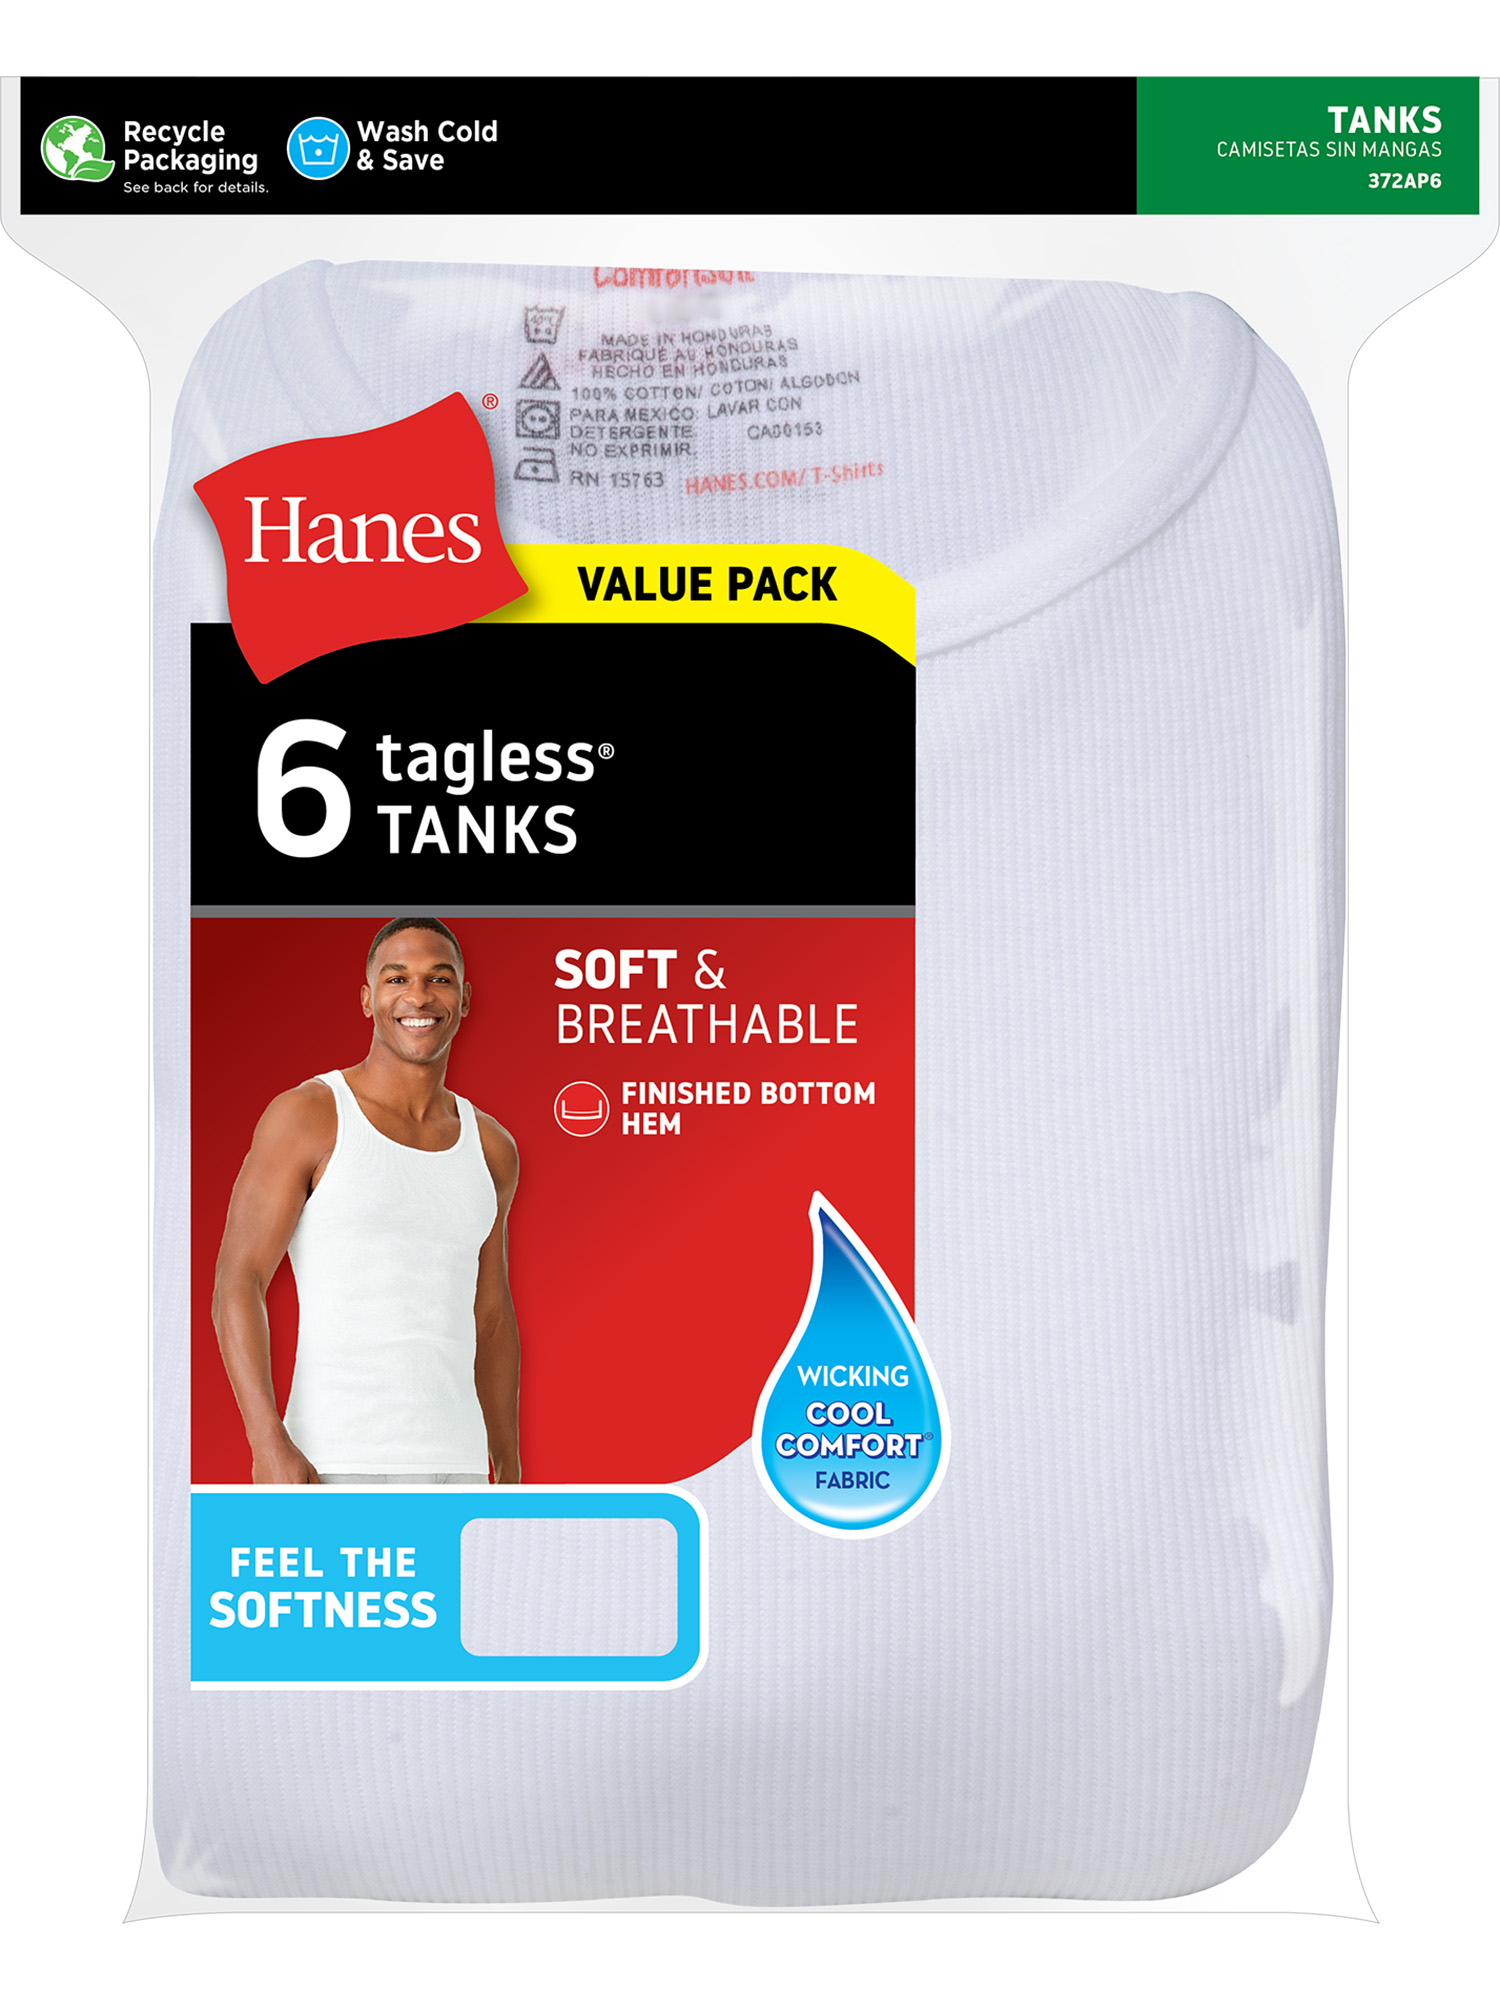 Hanes Men's Tank Top Undershirt Pack in White, Ribbed Moisture-Wicking Cotton, 6-Pack - image 3 of 10